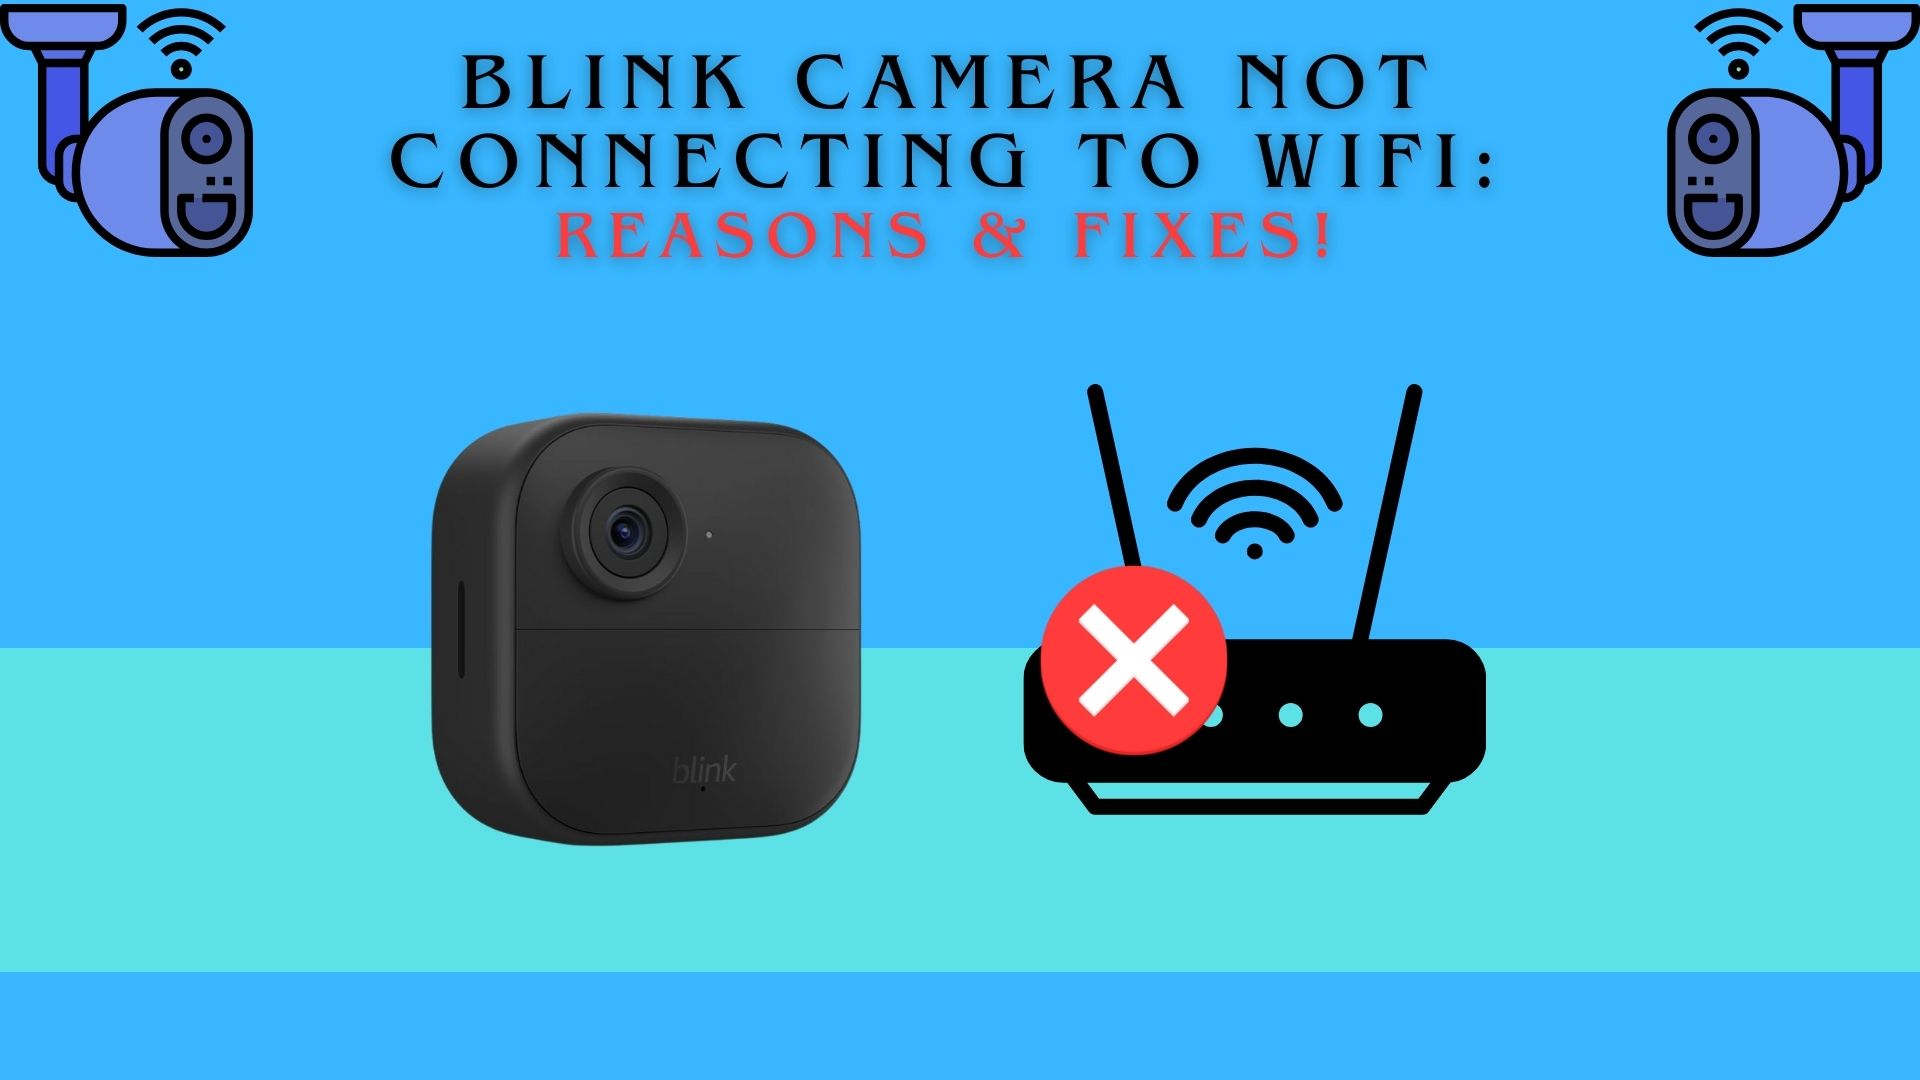 Blink Camera Not Connecting to WiFi: Reasons & Fixes!